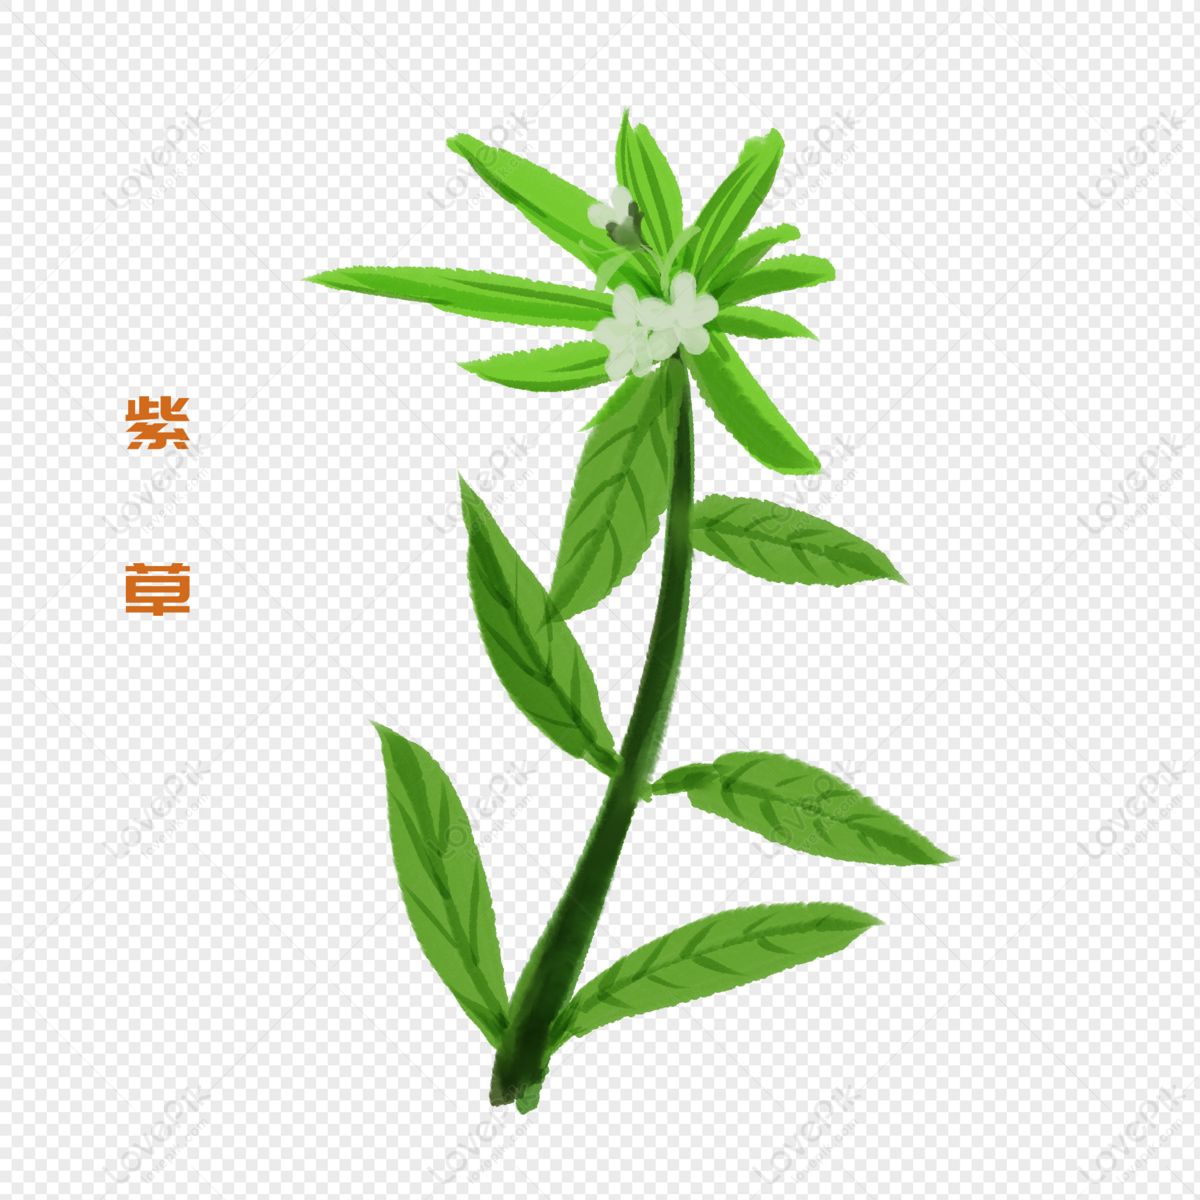 Cartoon Herbal Comfrey Illustration PNG Transparent Background And Clipart  Image For Free Download - Lovepik | 401400940